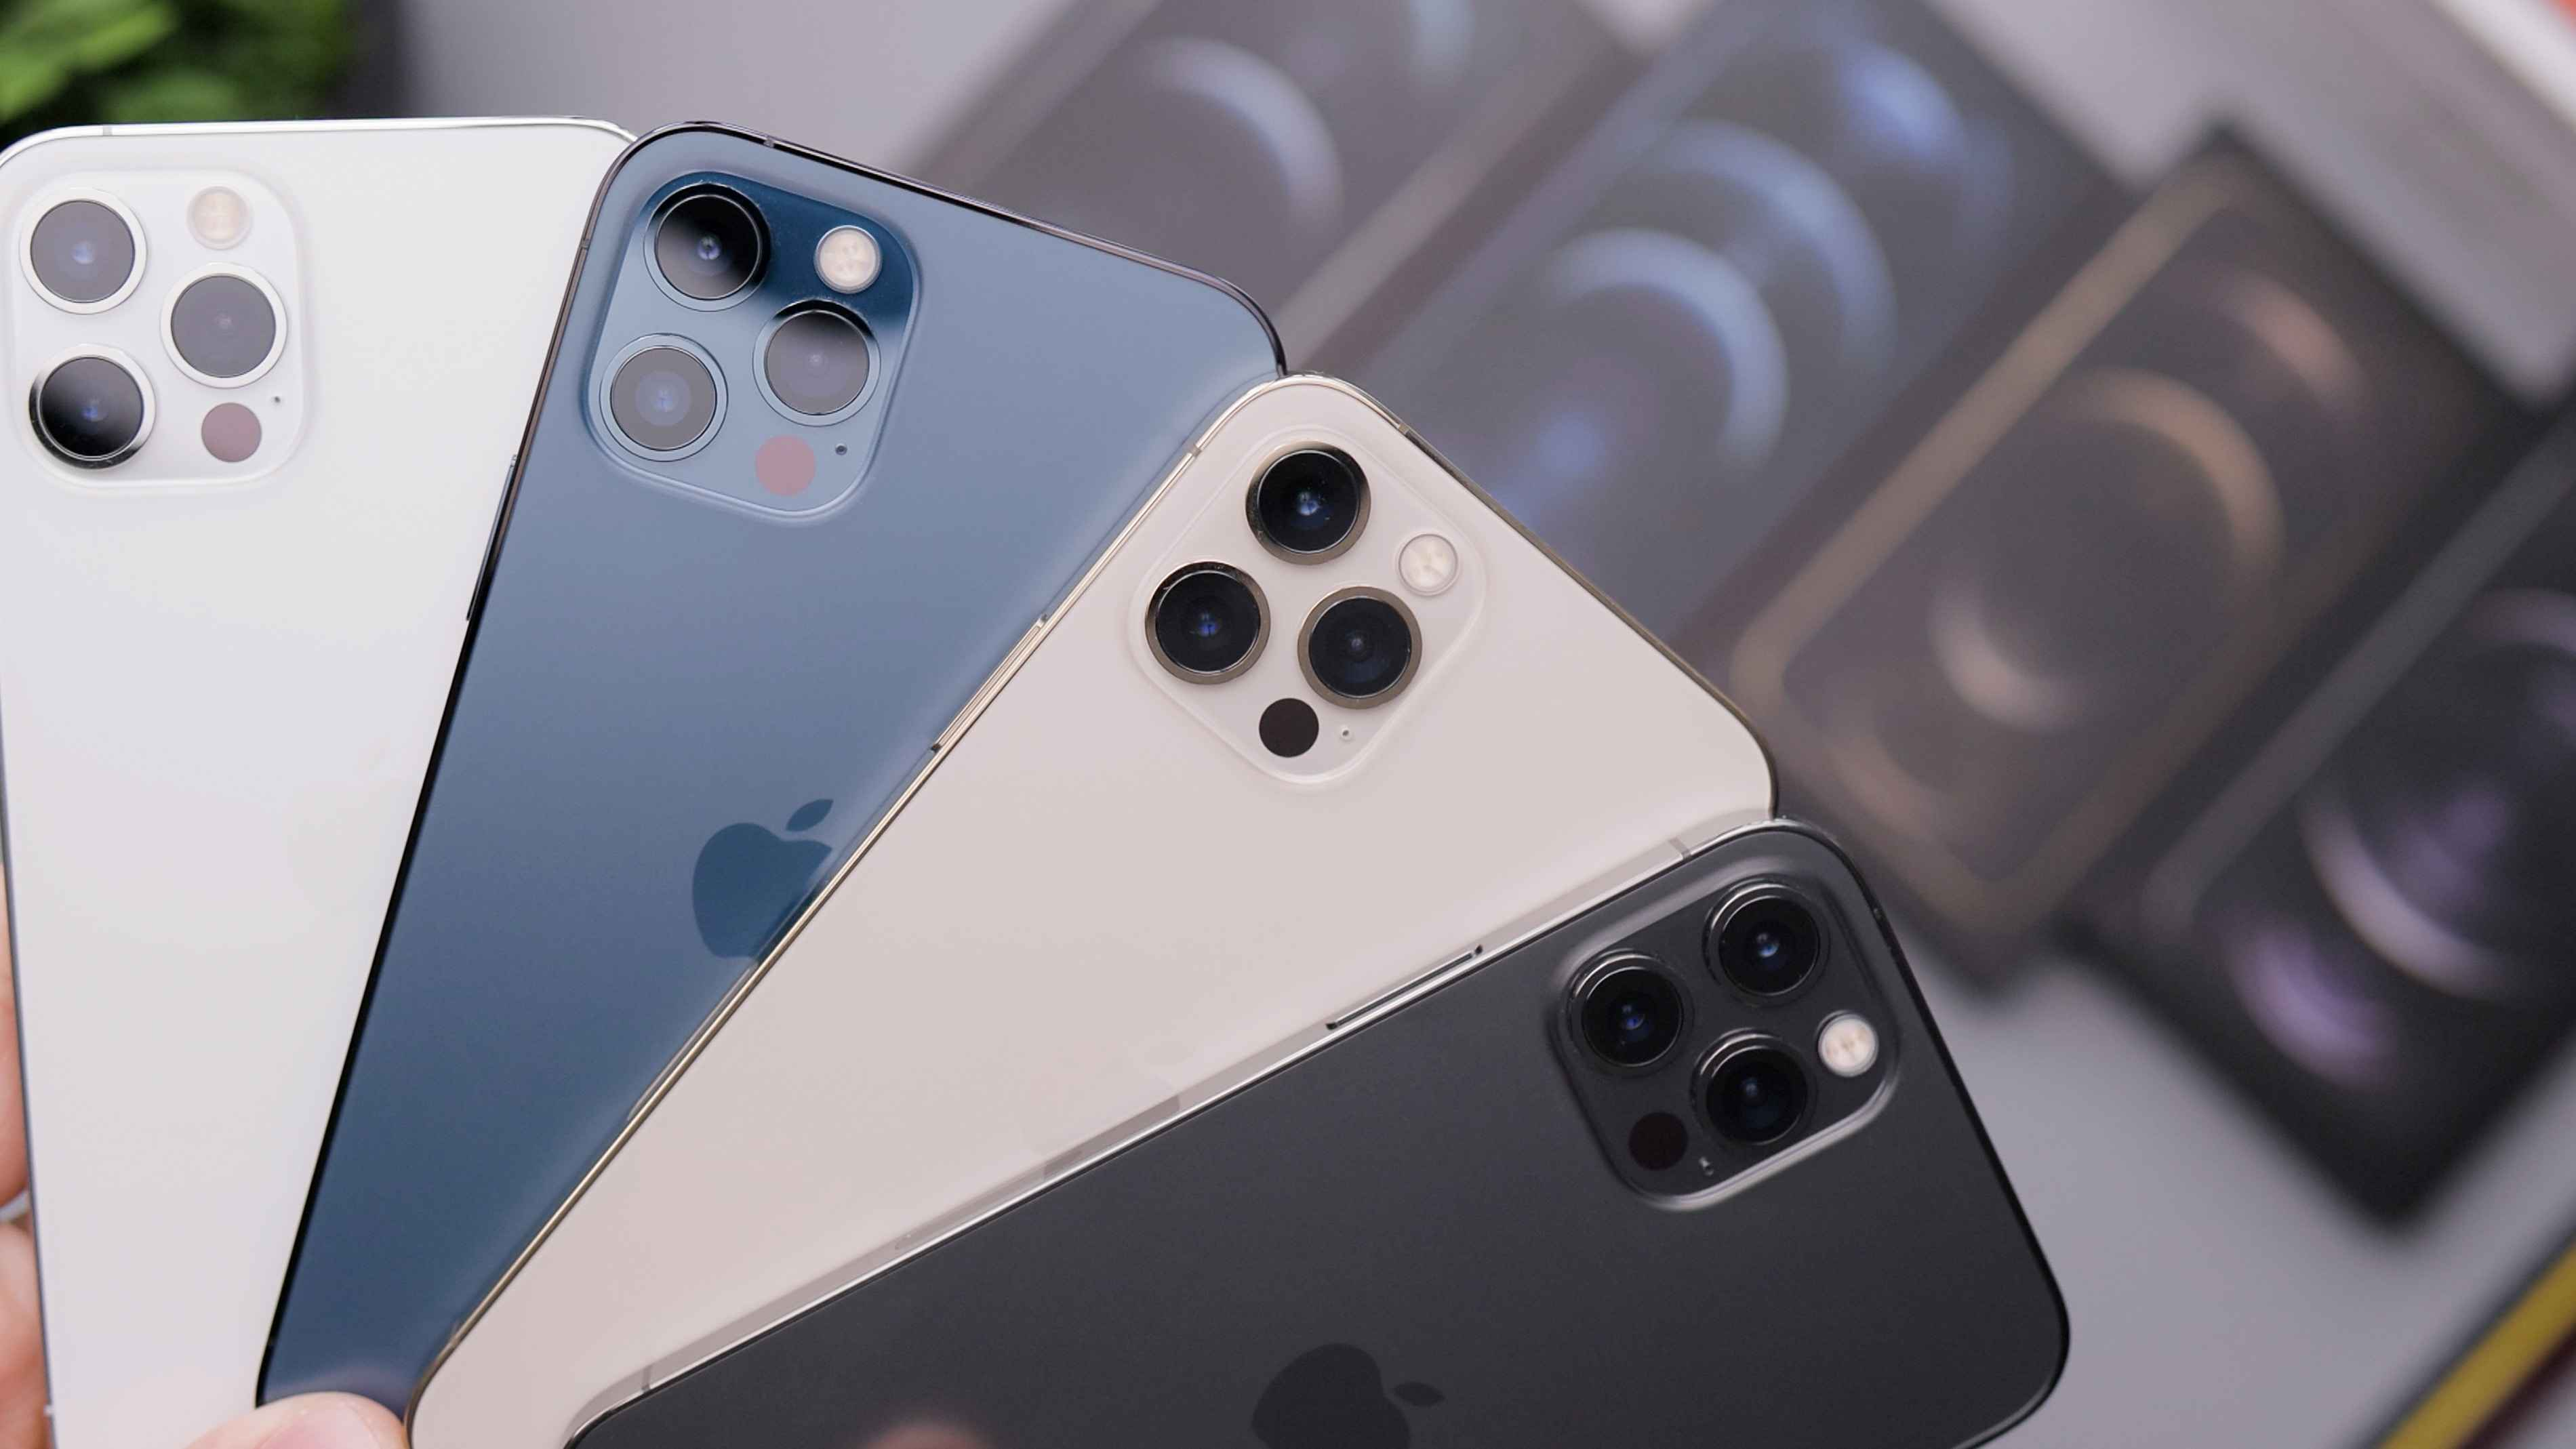 5 Key Features that Set the iPhone Camera Apart from Other Smartphones